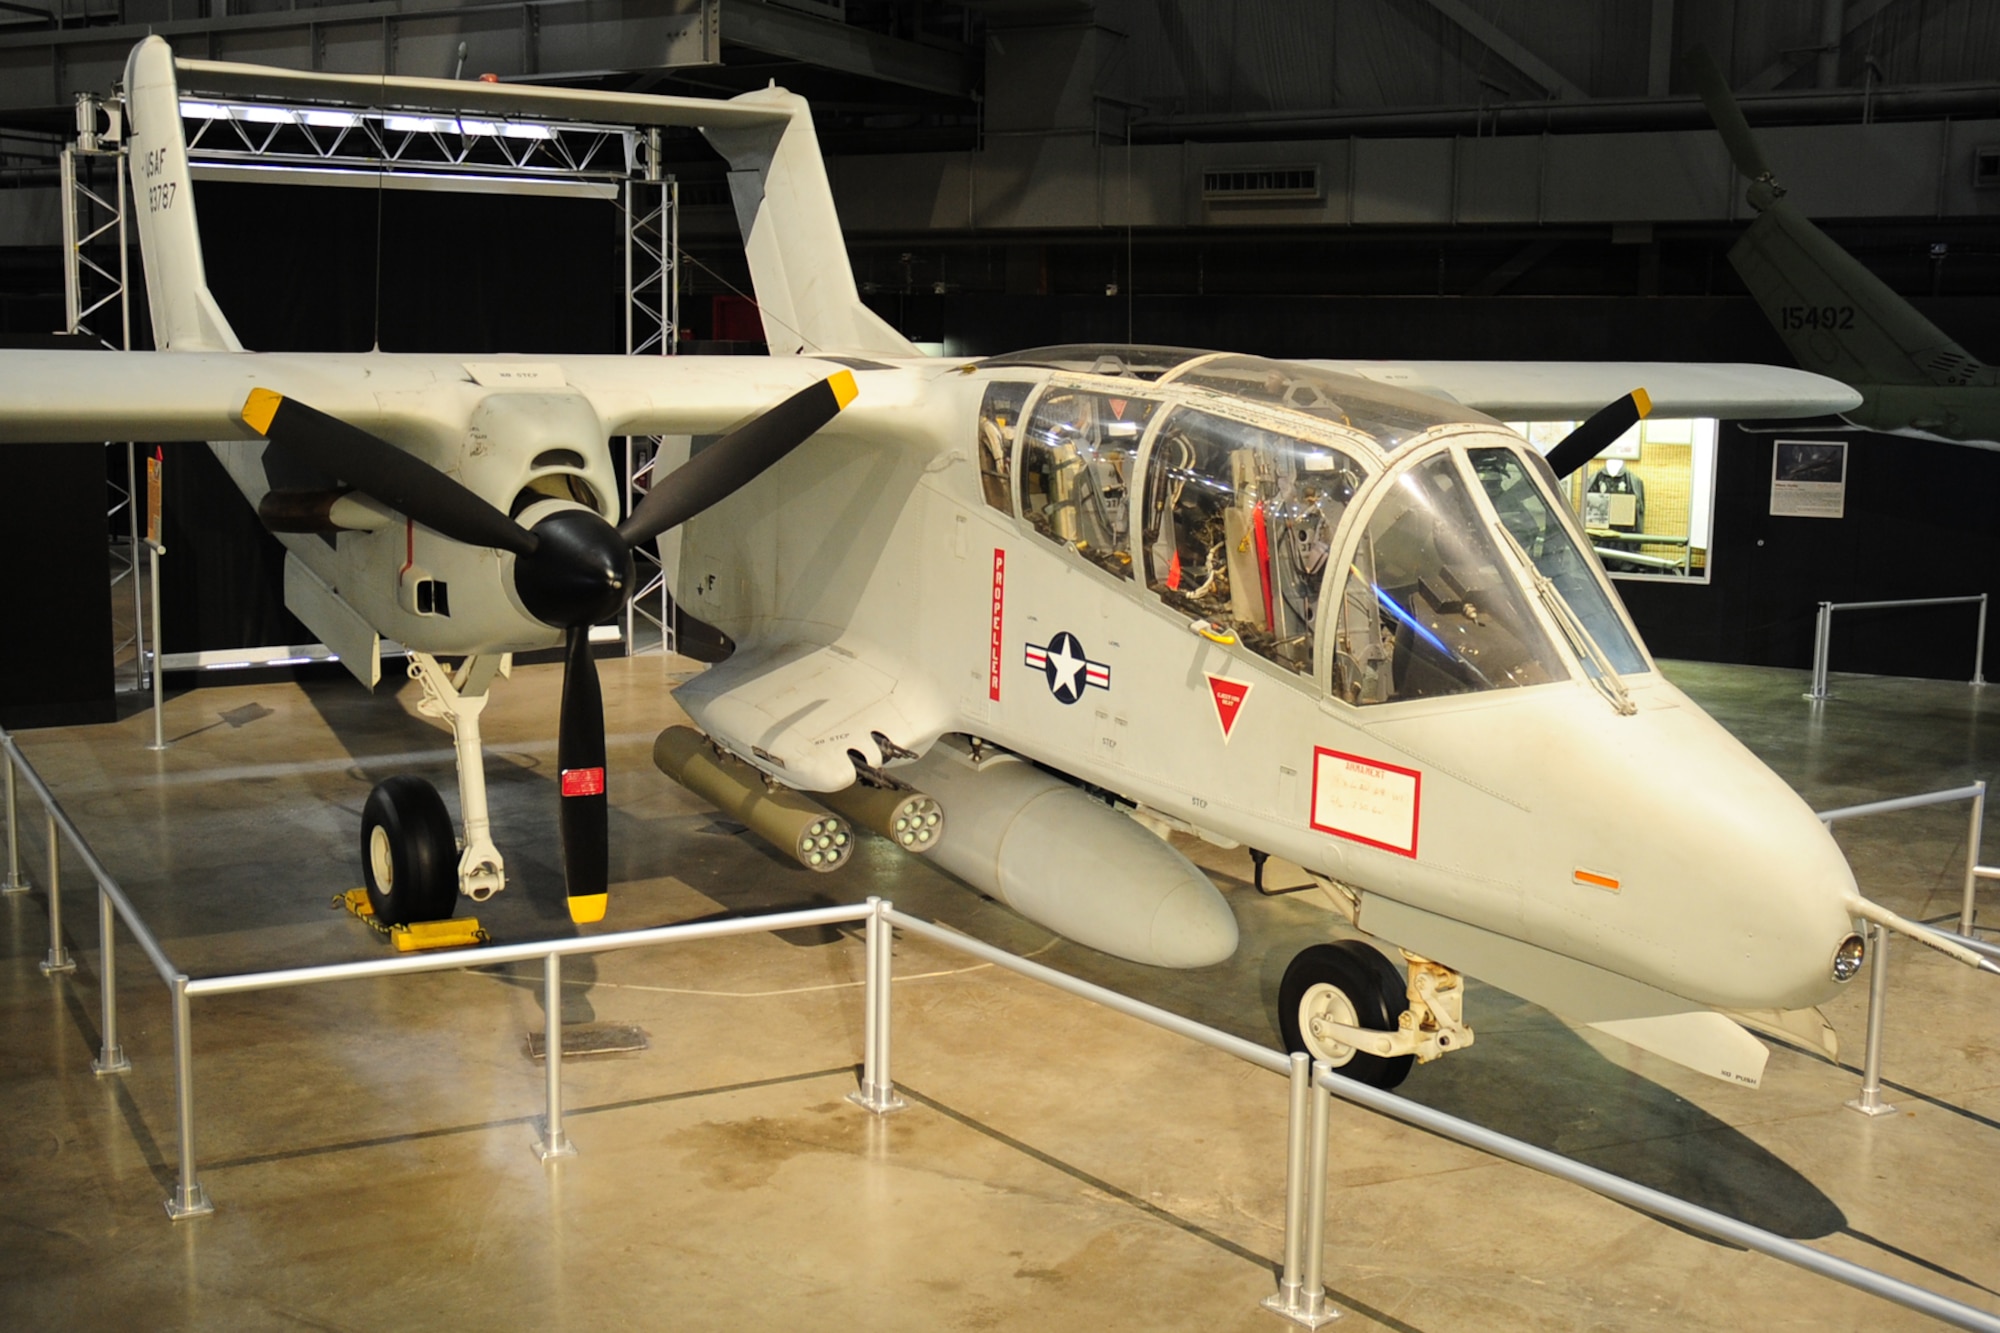 DAYTON, Ohio -- North American Rockwell OV-10A in the Southeast Asia War Gallery at the National Museum of the United States Air Force. (U.S. Air Force photo) 